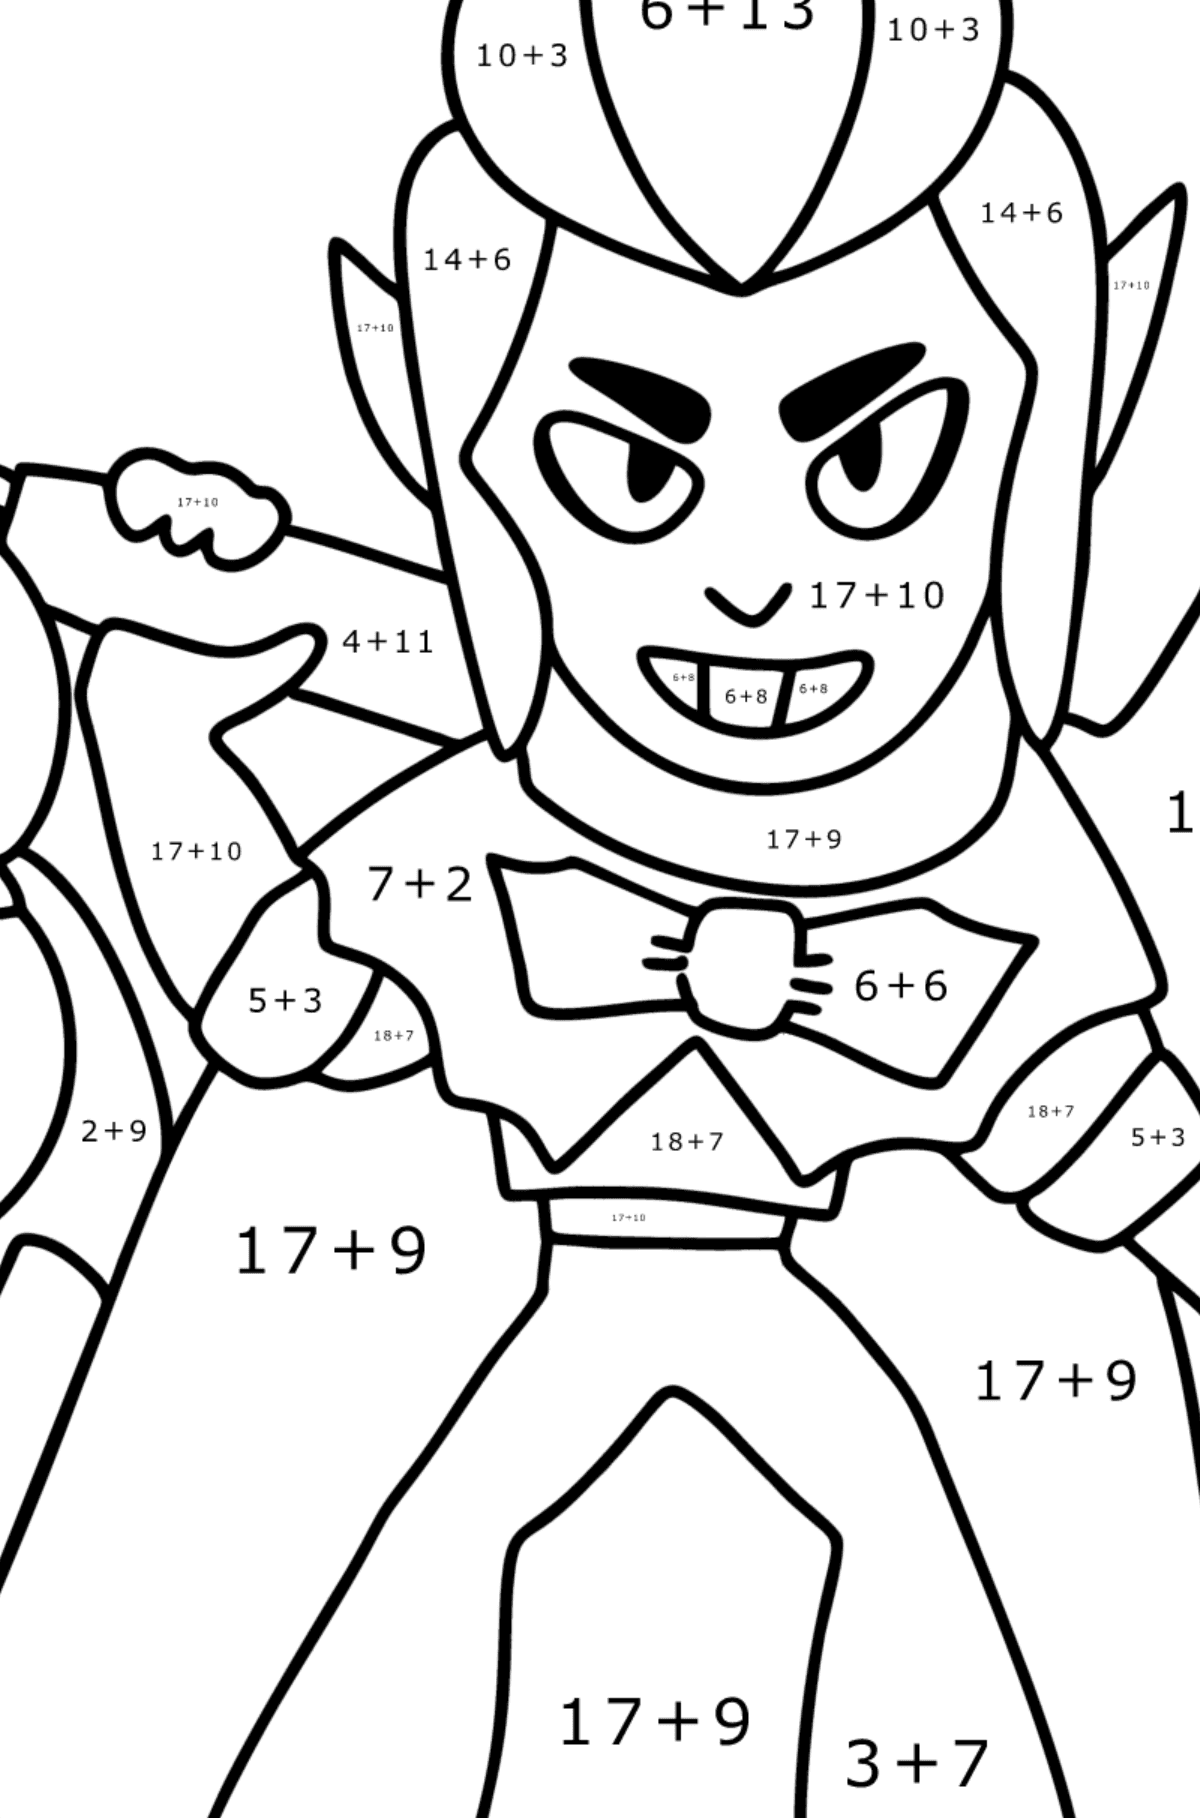 Brawl Stars Mortis coloring page - Math Coloring - Addition for Kids